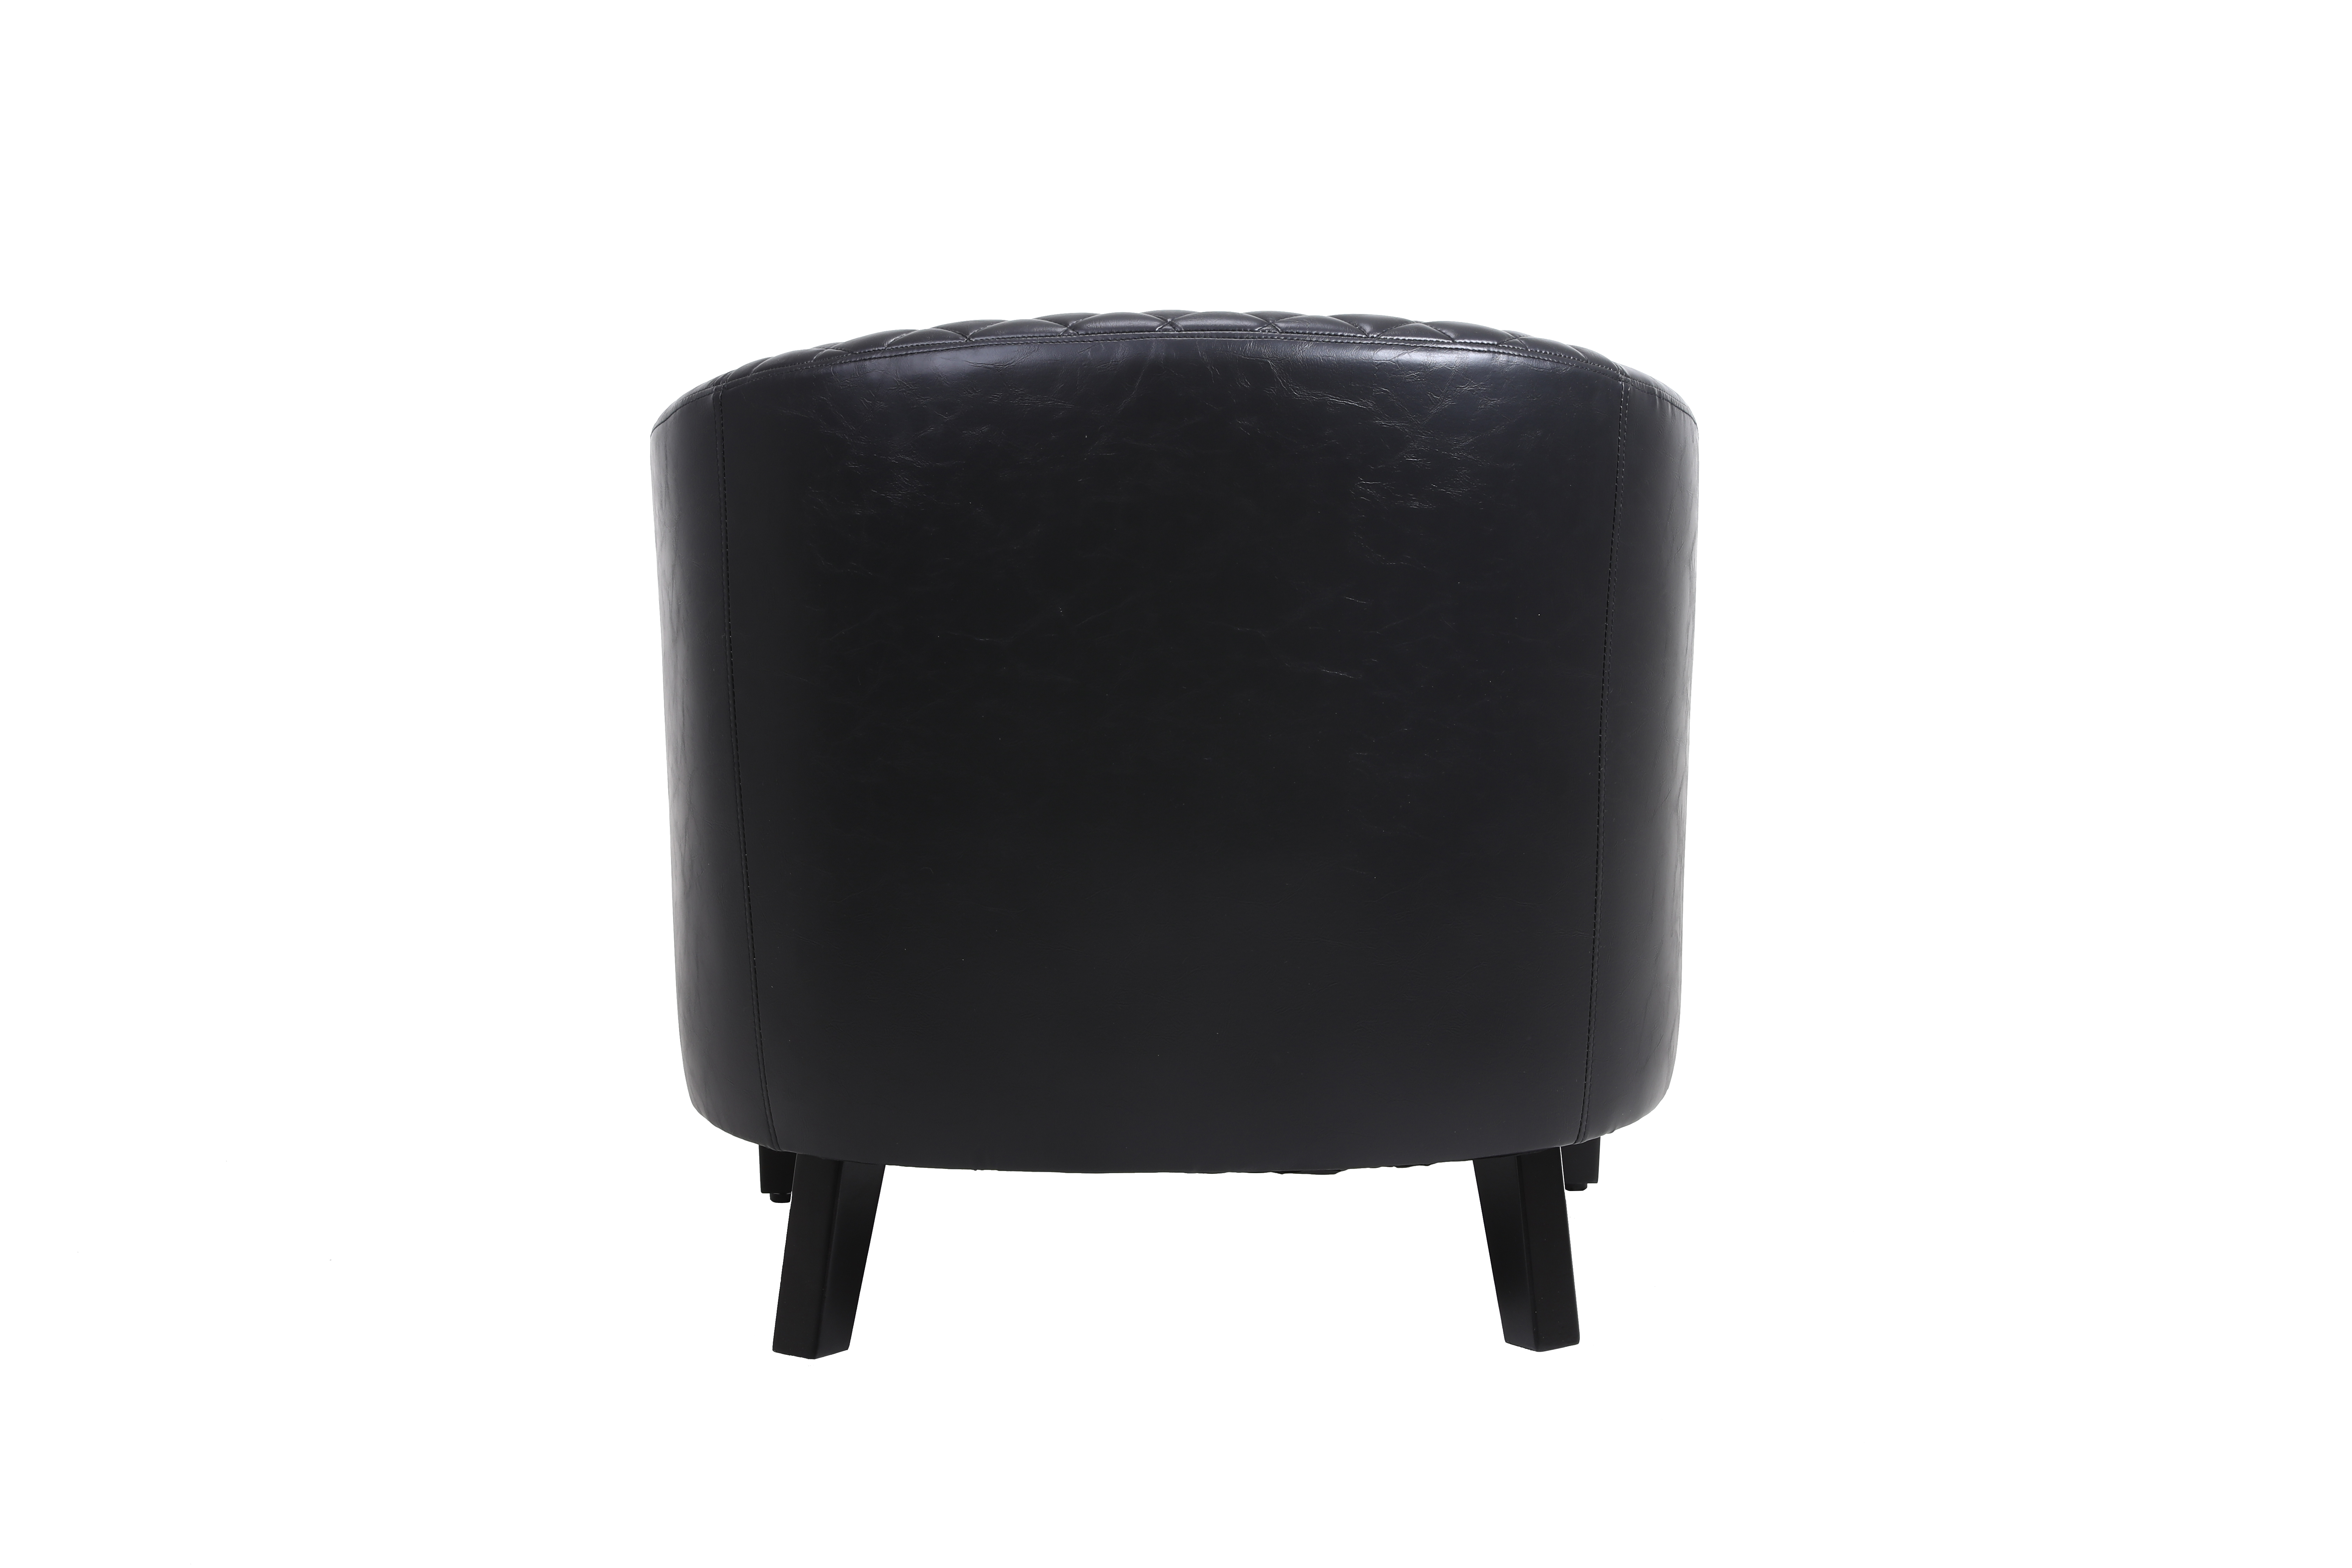 Modern Barrel Chair Tub Chair Faux Leather Club Chair with Arms and Nailheads, Upholstered Barrel Accent Chair for Living Room Bedroom - Black - image 5 of 8